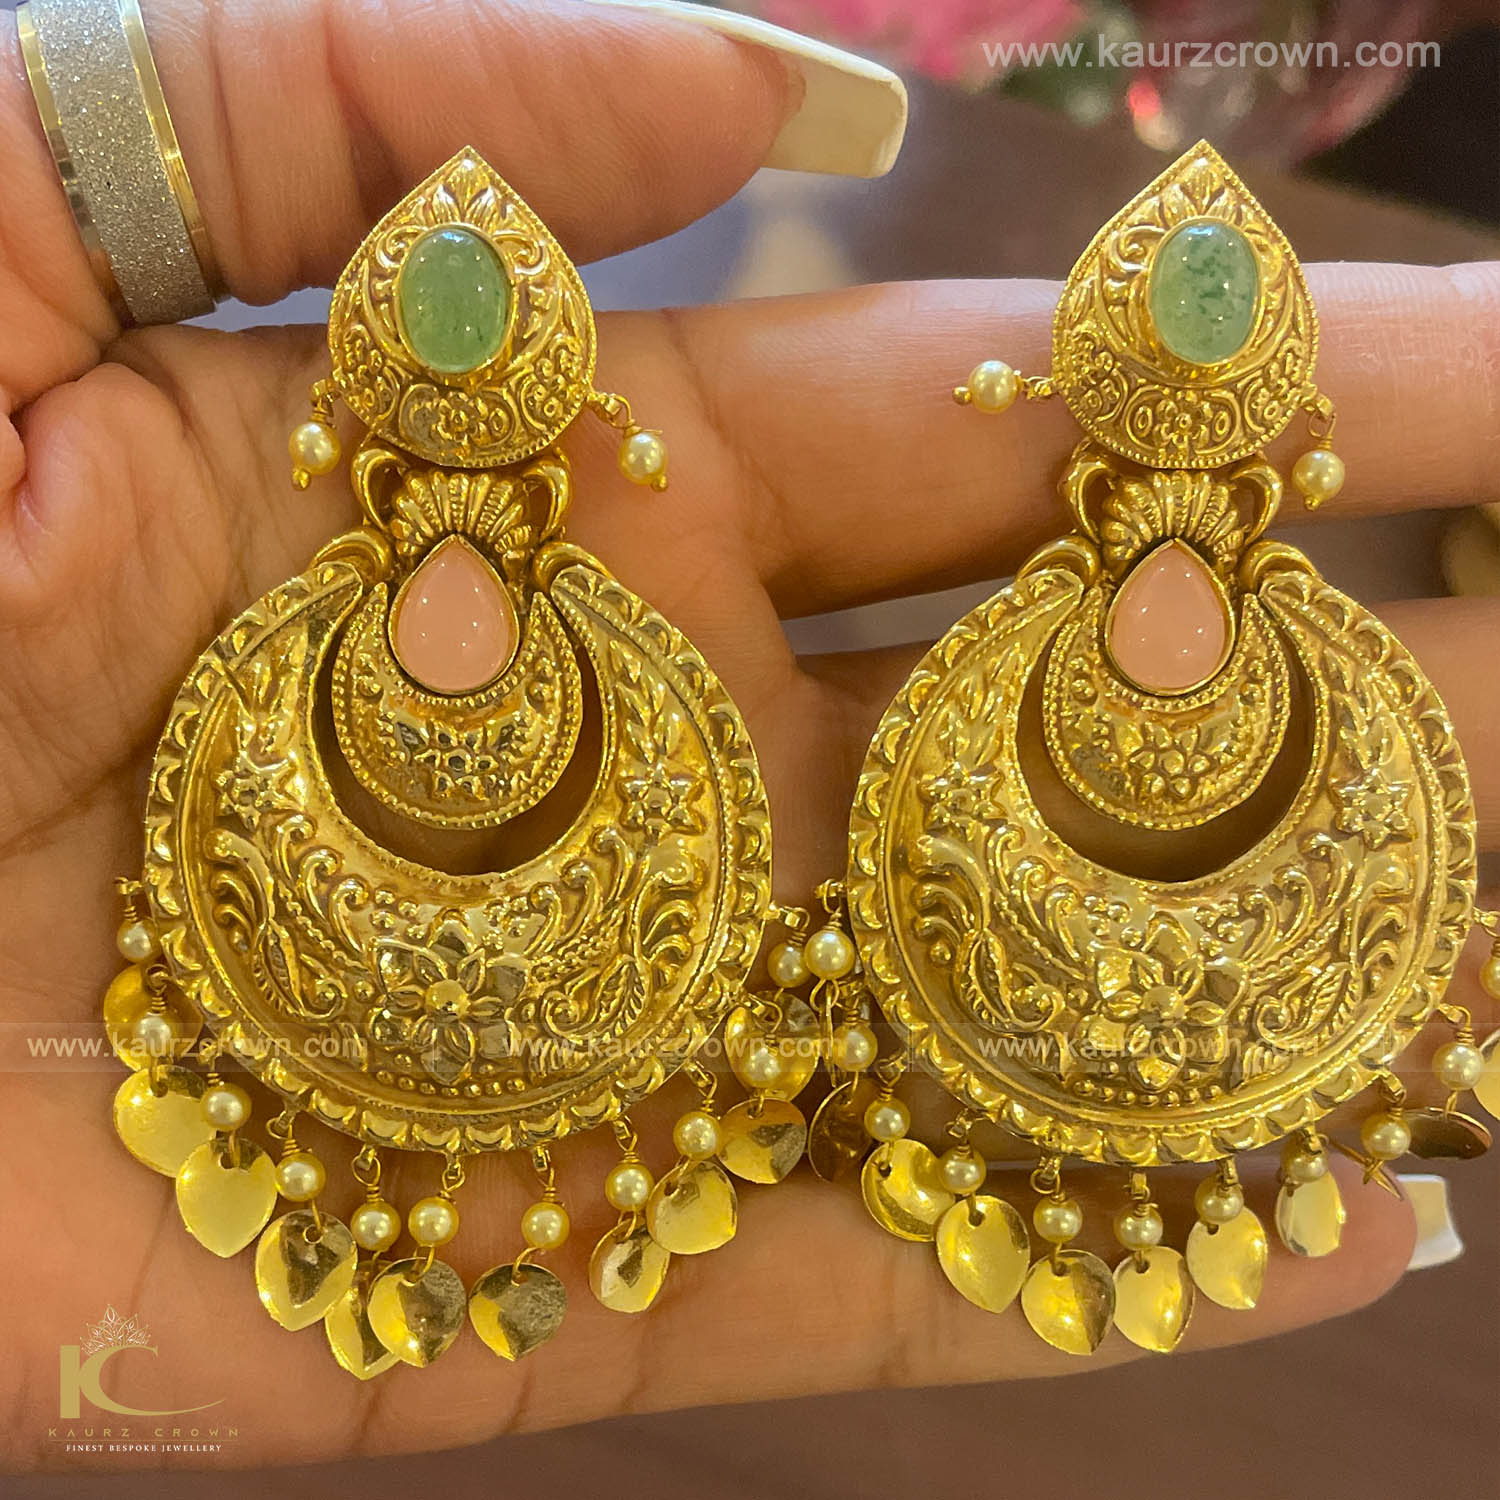 Zoya Traditional Antique Gold Plated Earrings Tikka Set , zoya , traditional , antique , Gold plated , earrings , tikka , set , zoya tikka set , punjabi jewellery , kaurz crown